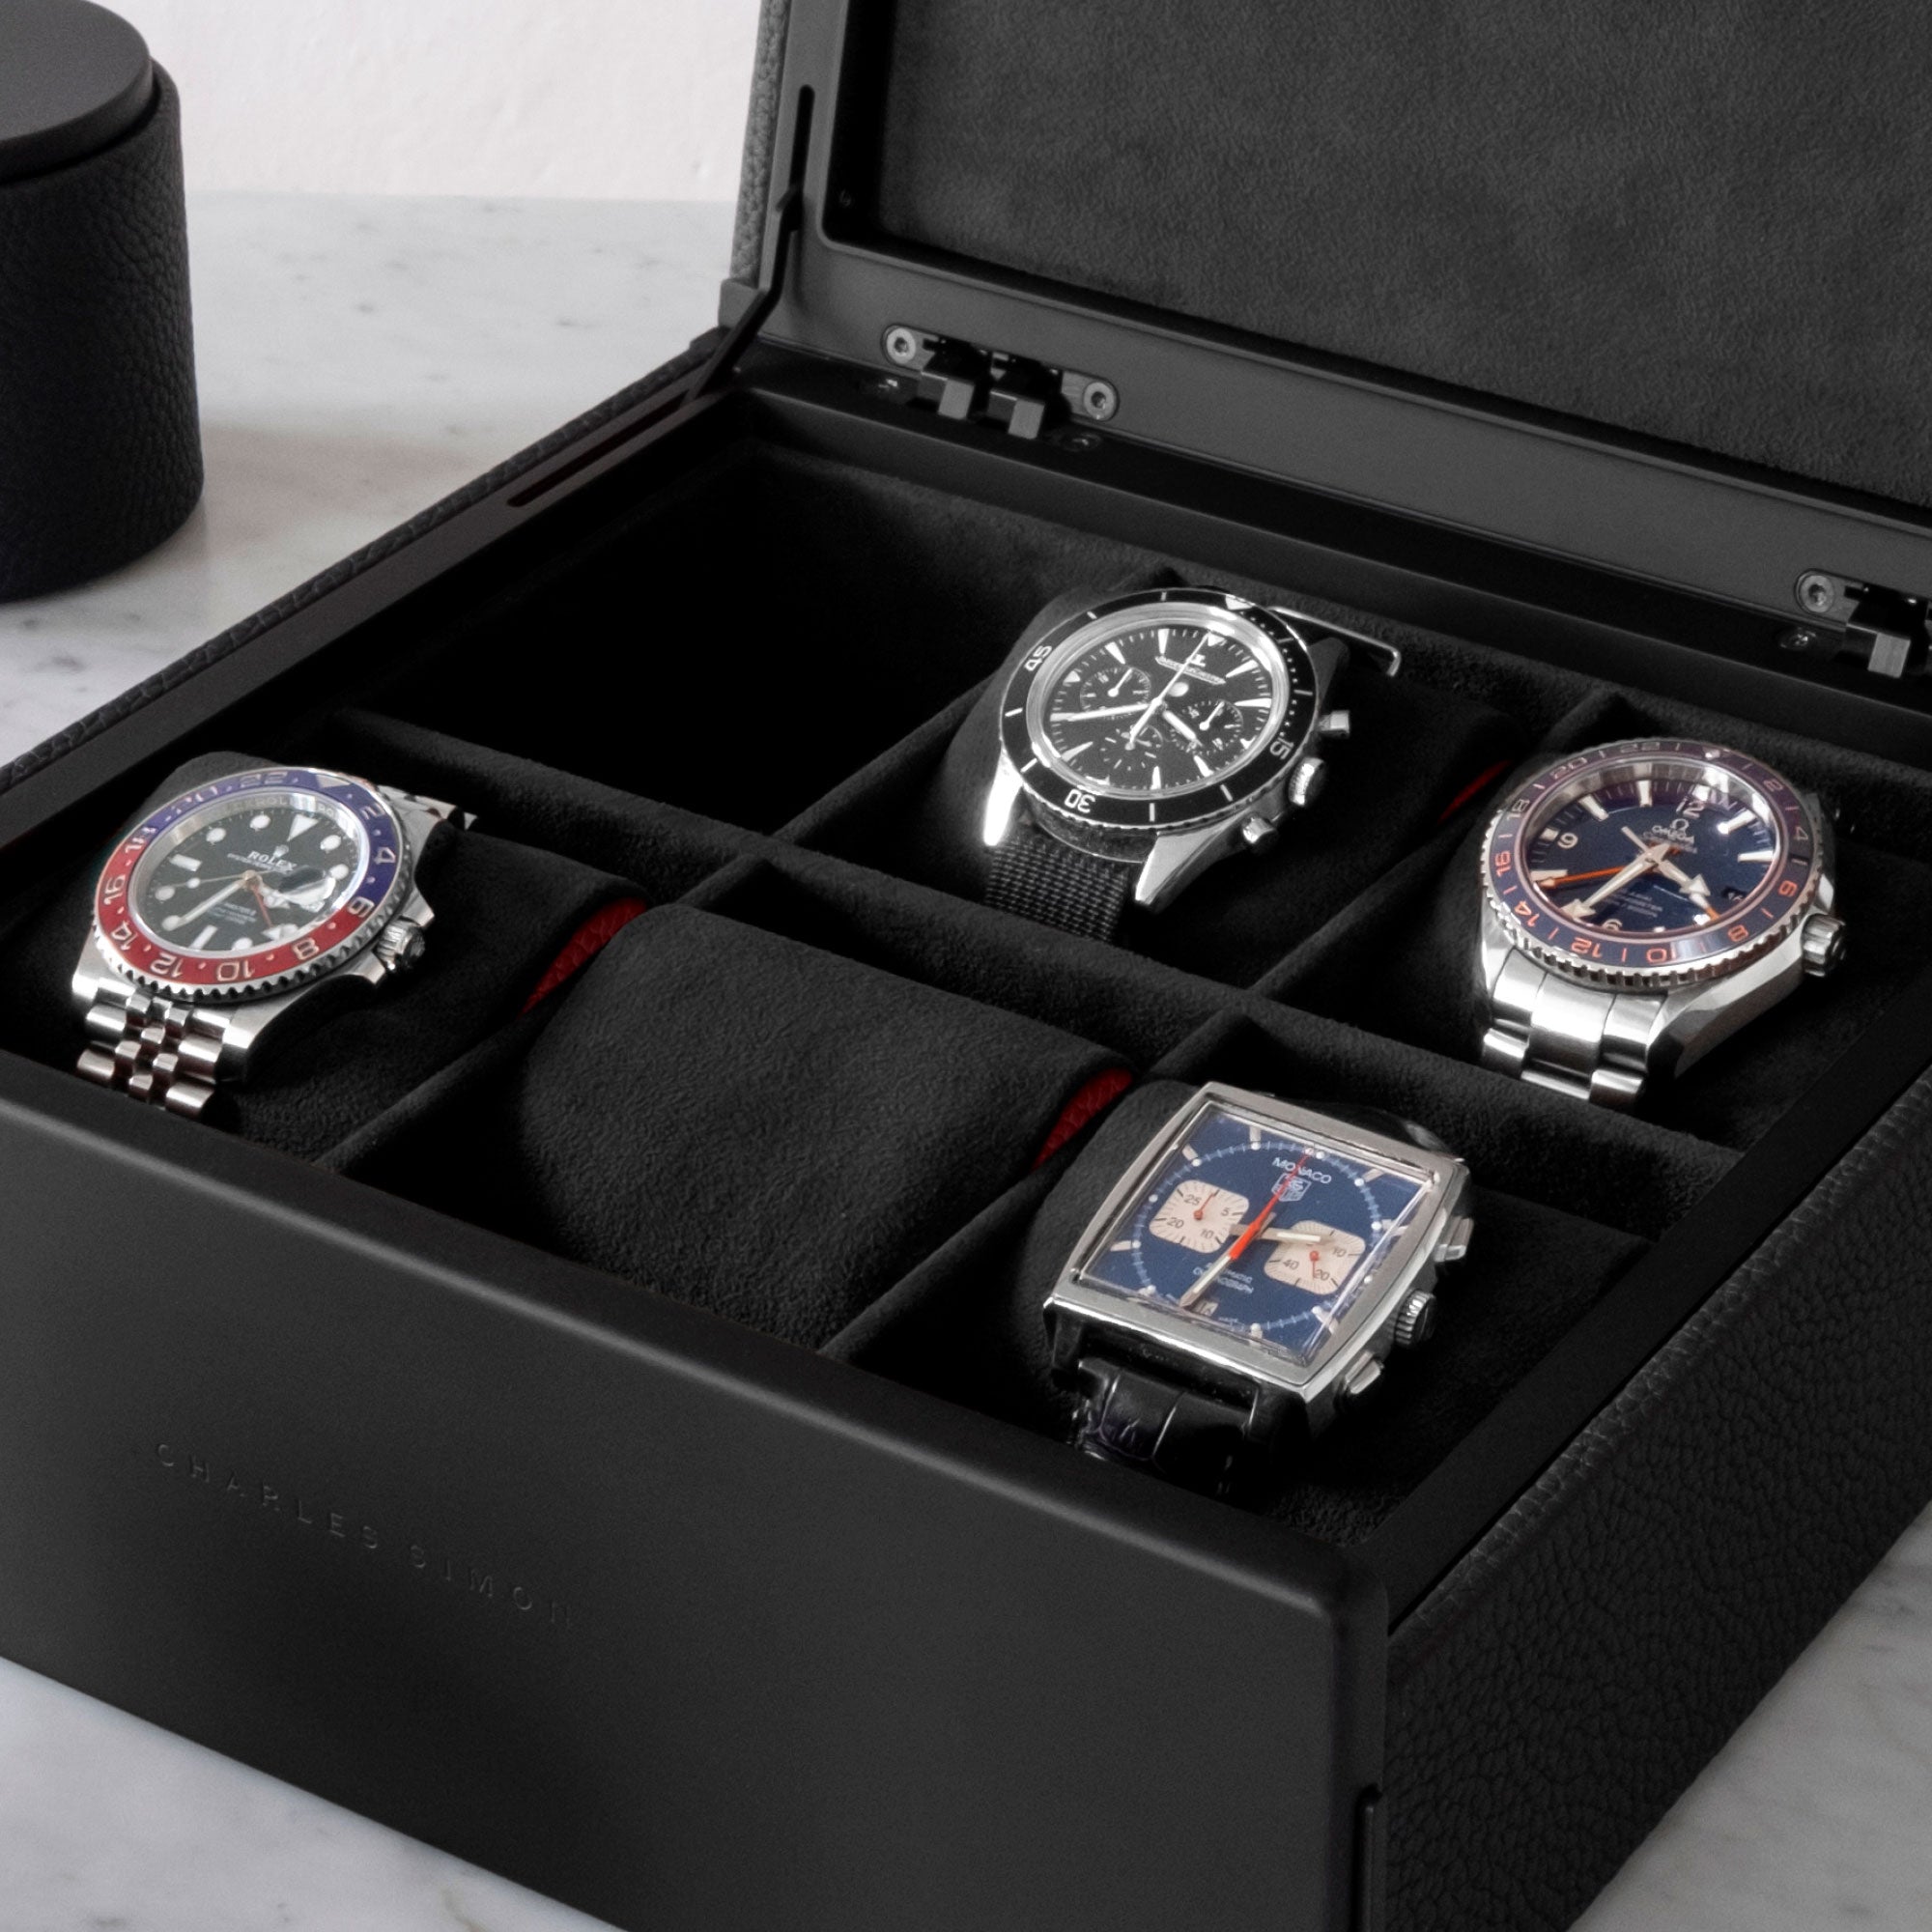 Detail photo of Rolex, Tagheuer, Omega and JaegeLeCoultre watches in all black Spence Watch box with red leather accents